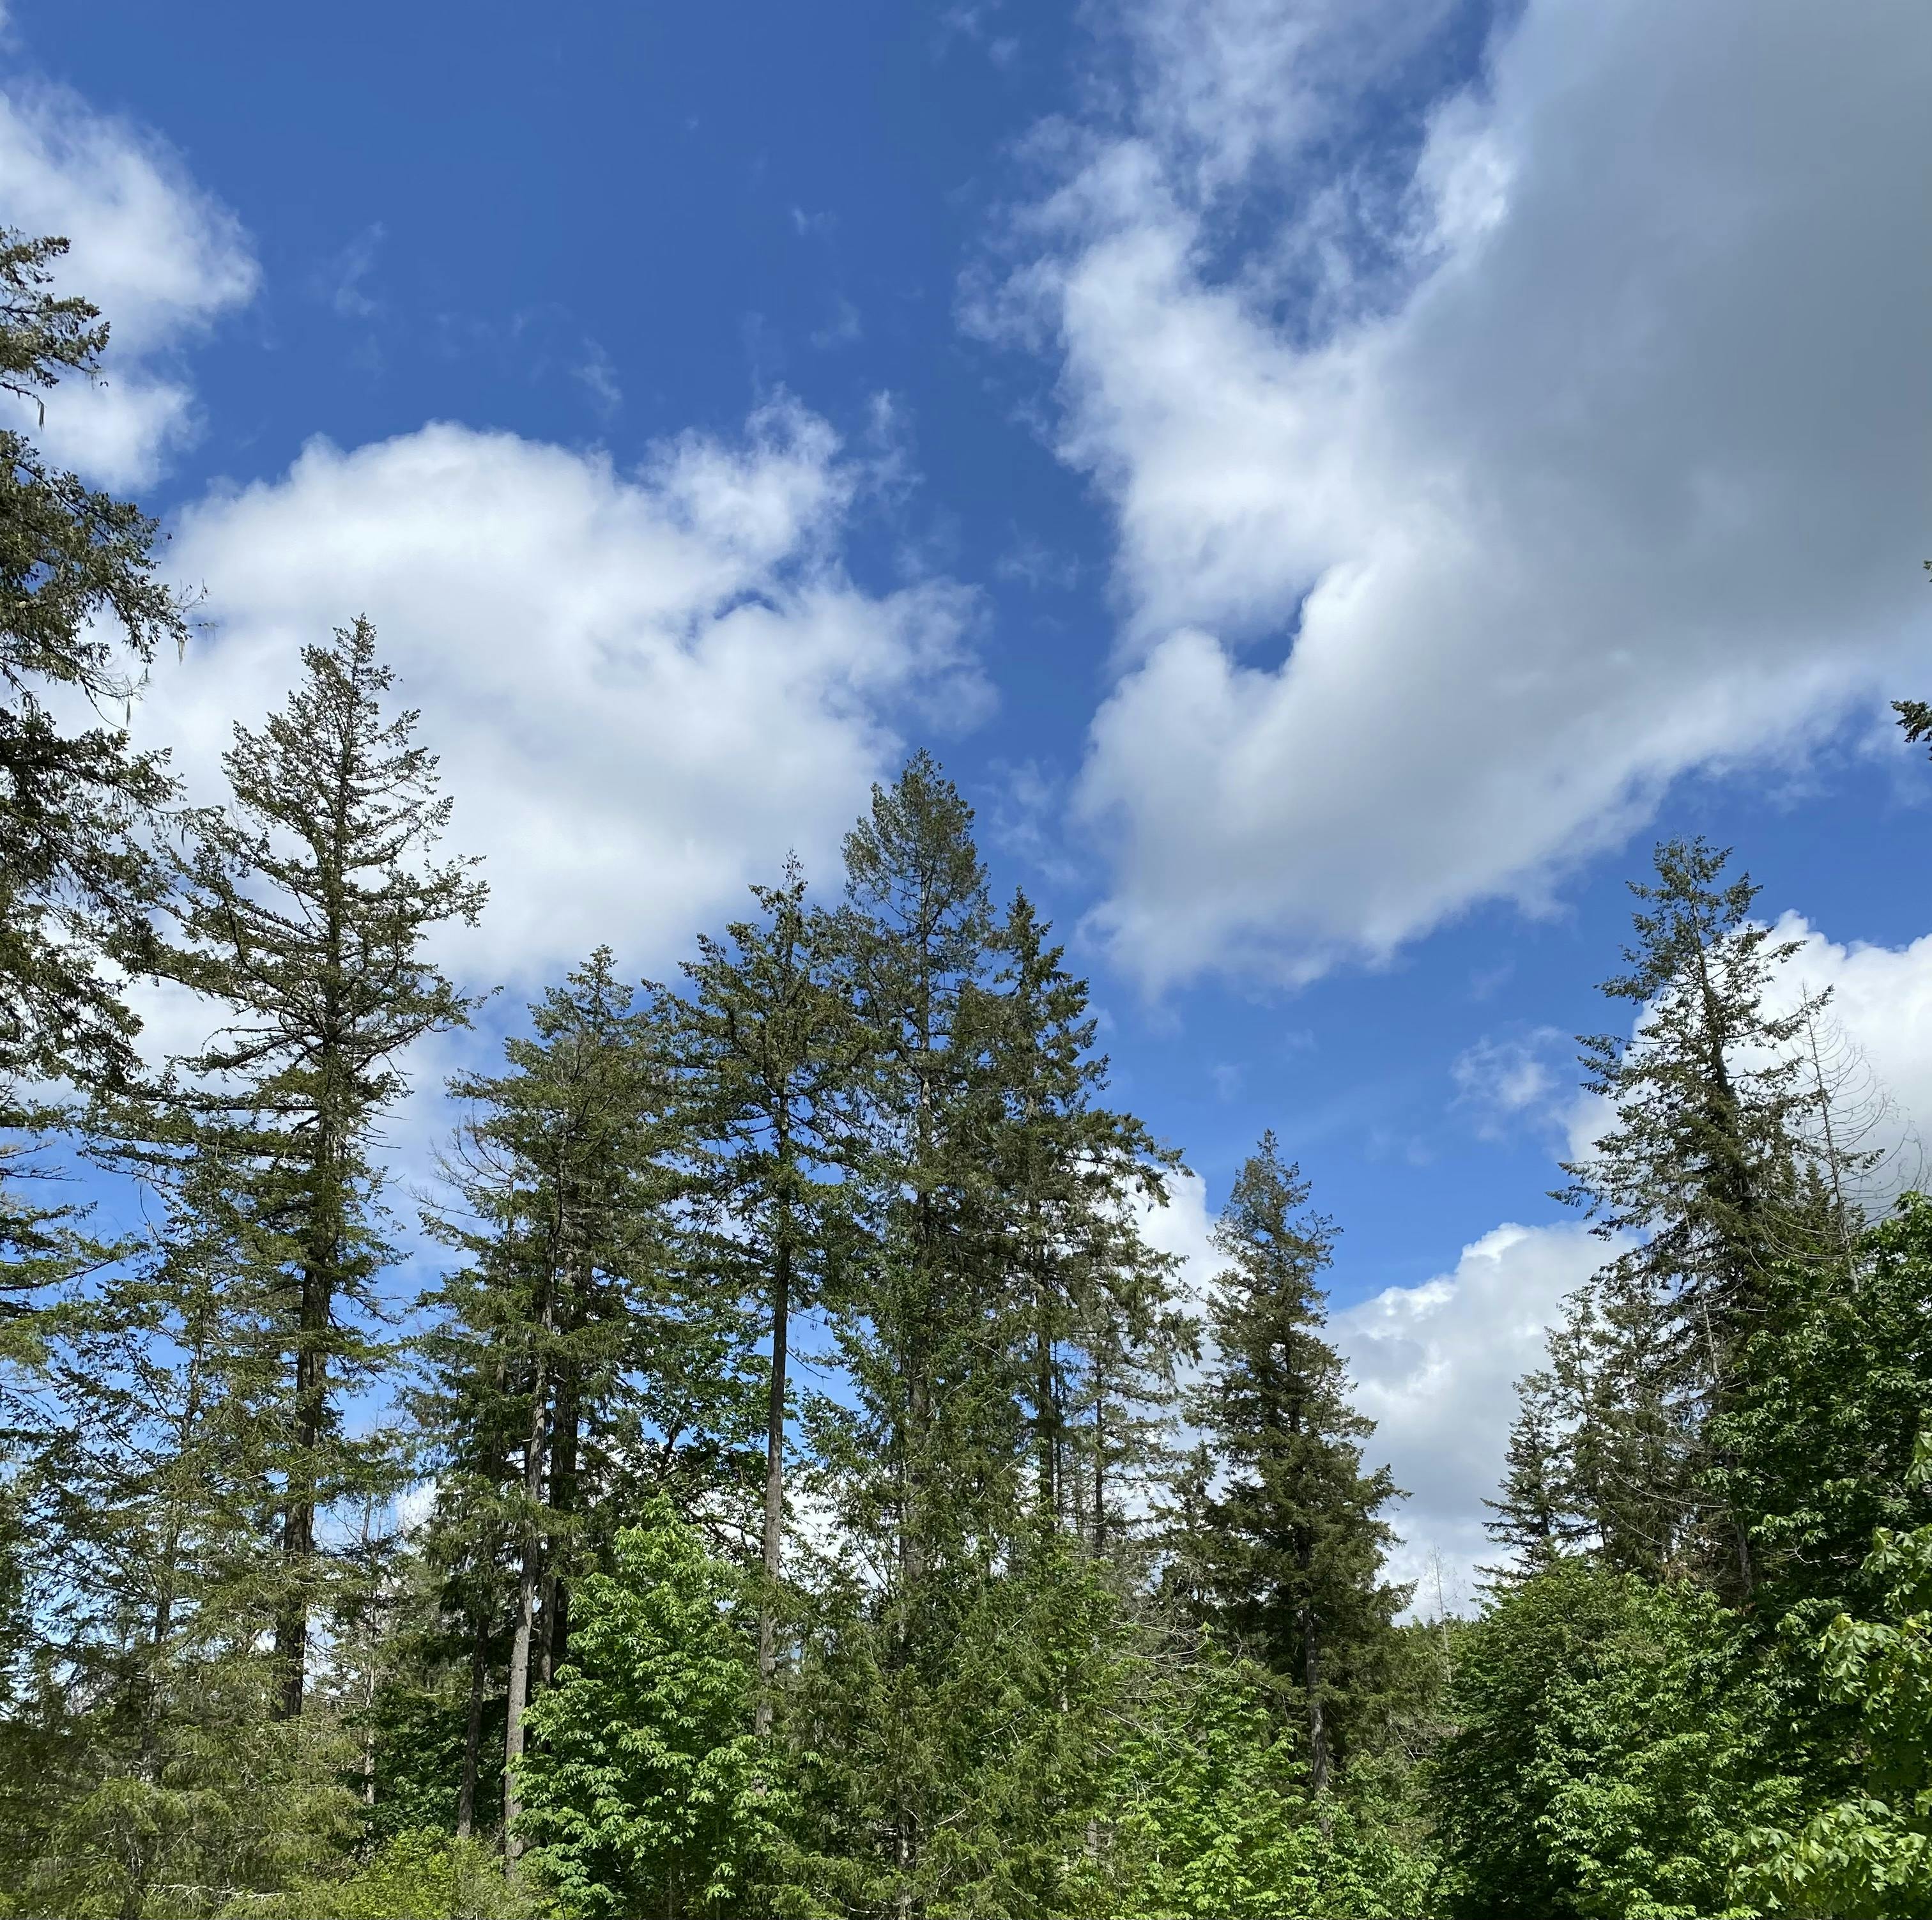 a photo of the horizon filled with trees reaching up to a blue sky with fluffy white clouds